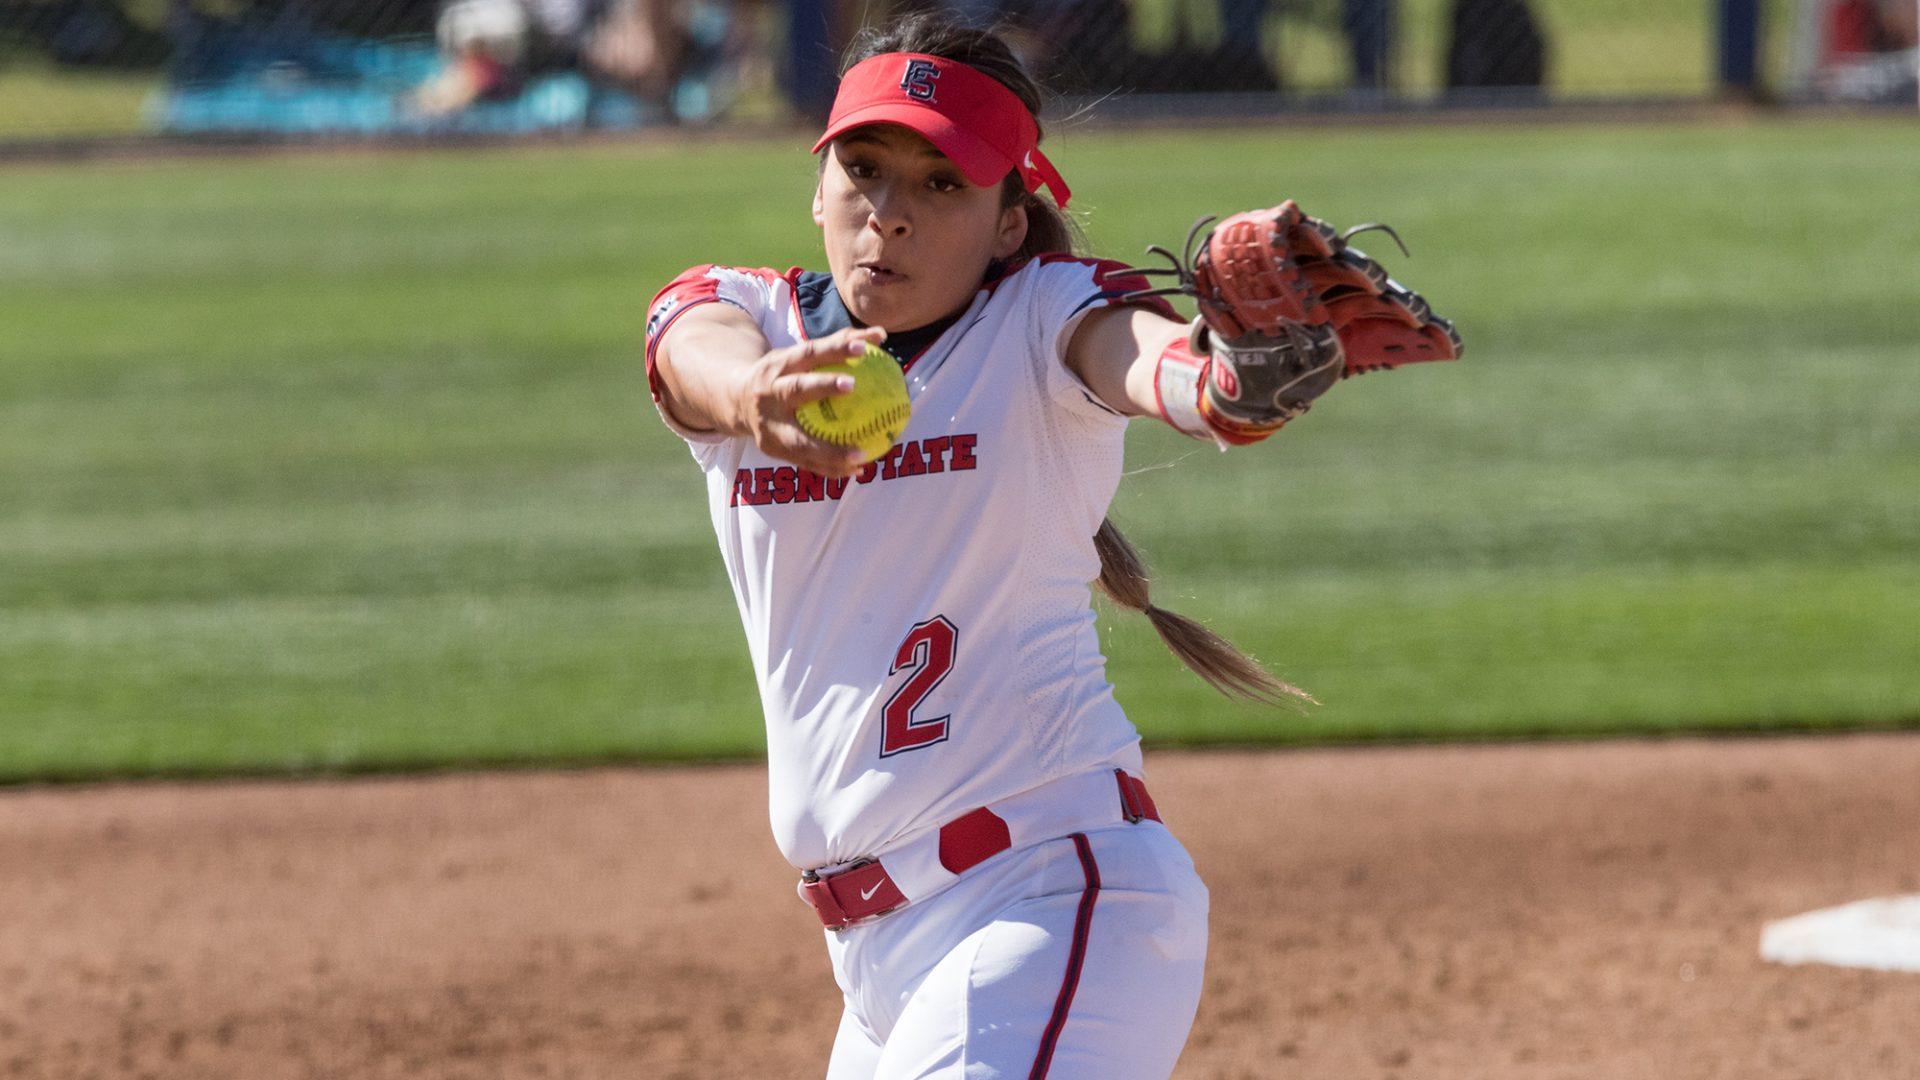 Sophomore+Samantha+Mejia+pitched+all+seven+innings+and+only+allowed+seven+hits+and+one+run+in+Game+2+against+the+San+Diego+State+Aztecs+on+April+21%2C+2018+at+Margie+Wright+Diamond.+The+%E2%80%98Dogs+won+the+series+2-1.++%28Fresno+State+Athletics%29+